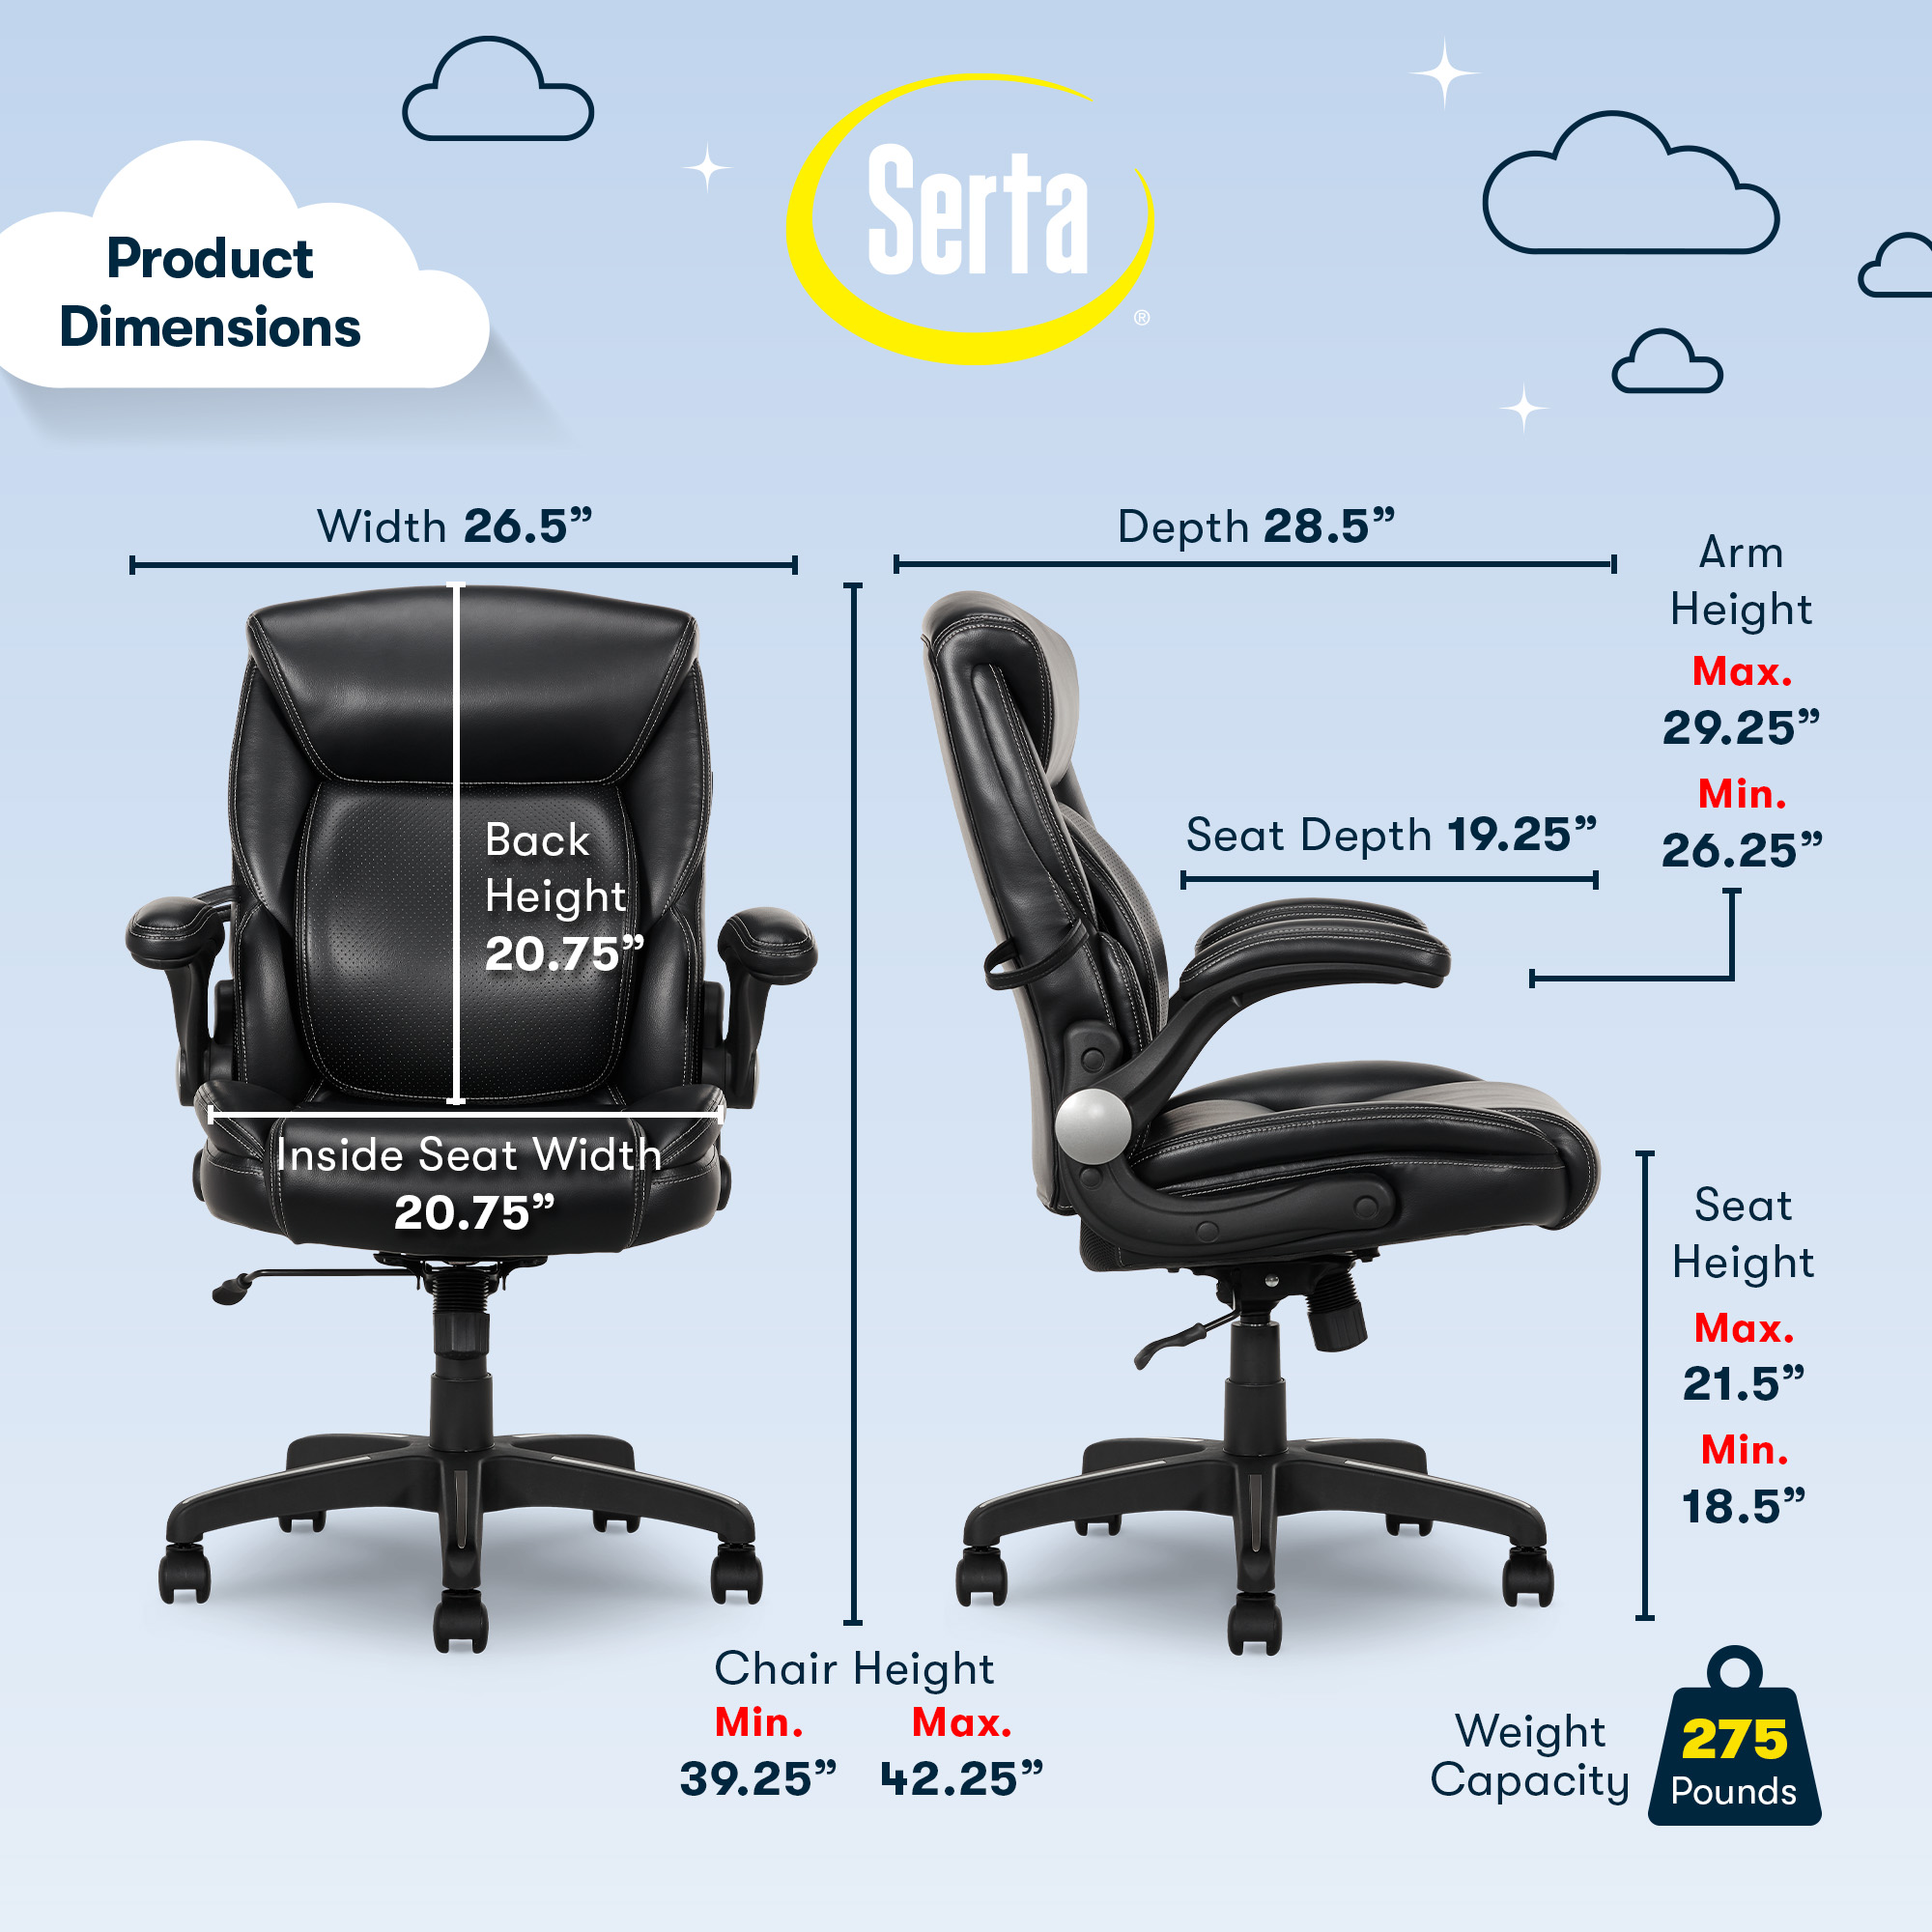 Serta Air Lumbar Bonded Leather Manager Office Chair, Black - image 4 of 15